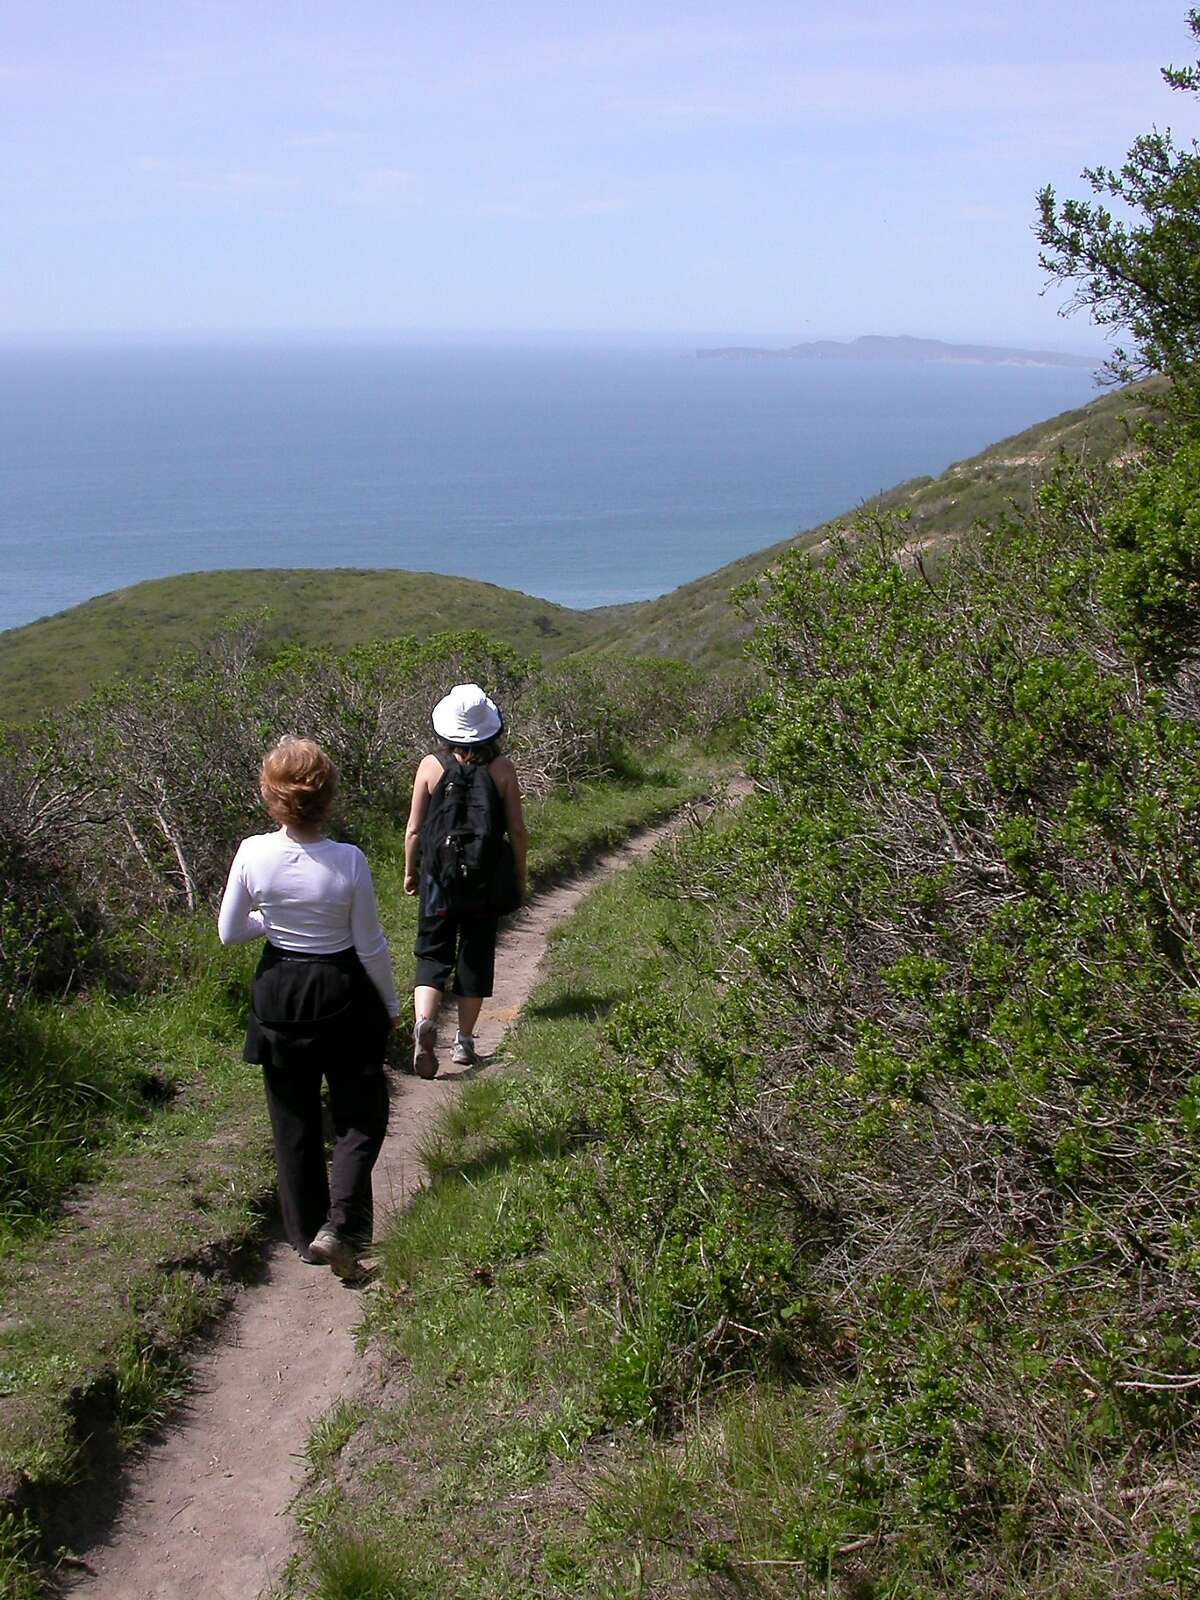 On the Sky Trail Loop, you emerge from forest for views of Drakes Bay, Chimney Rock Headlands and Limantour.